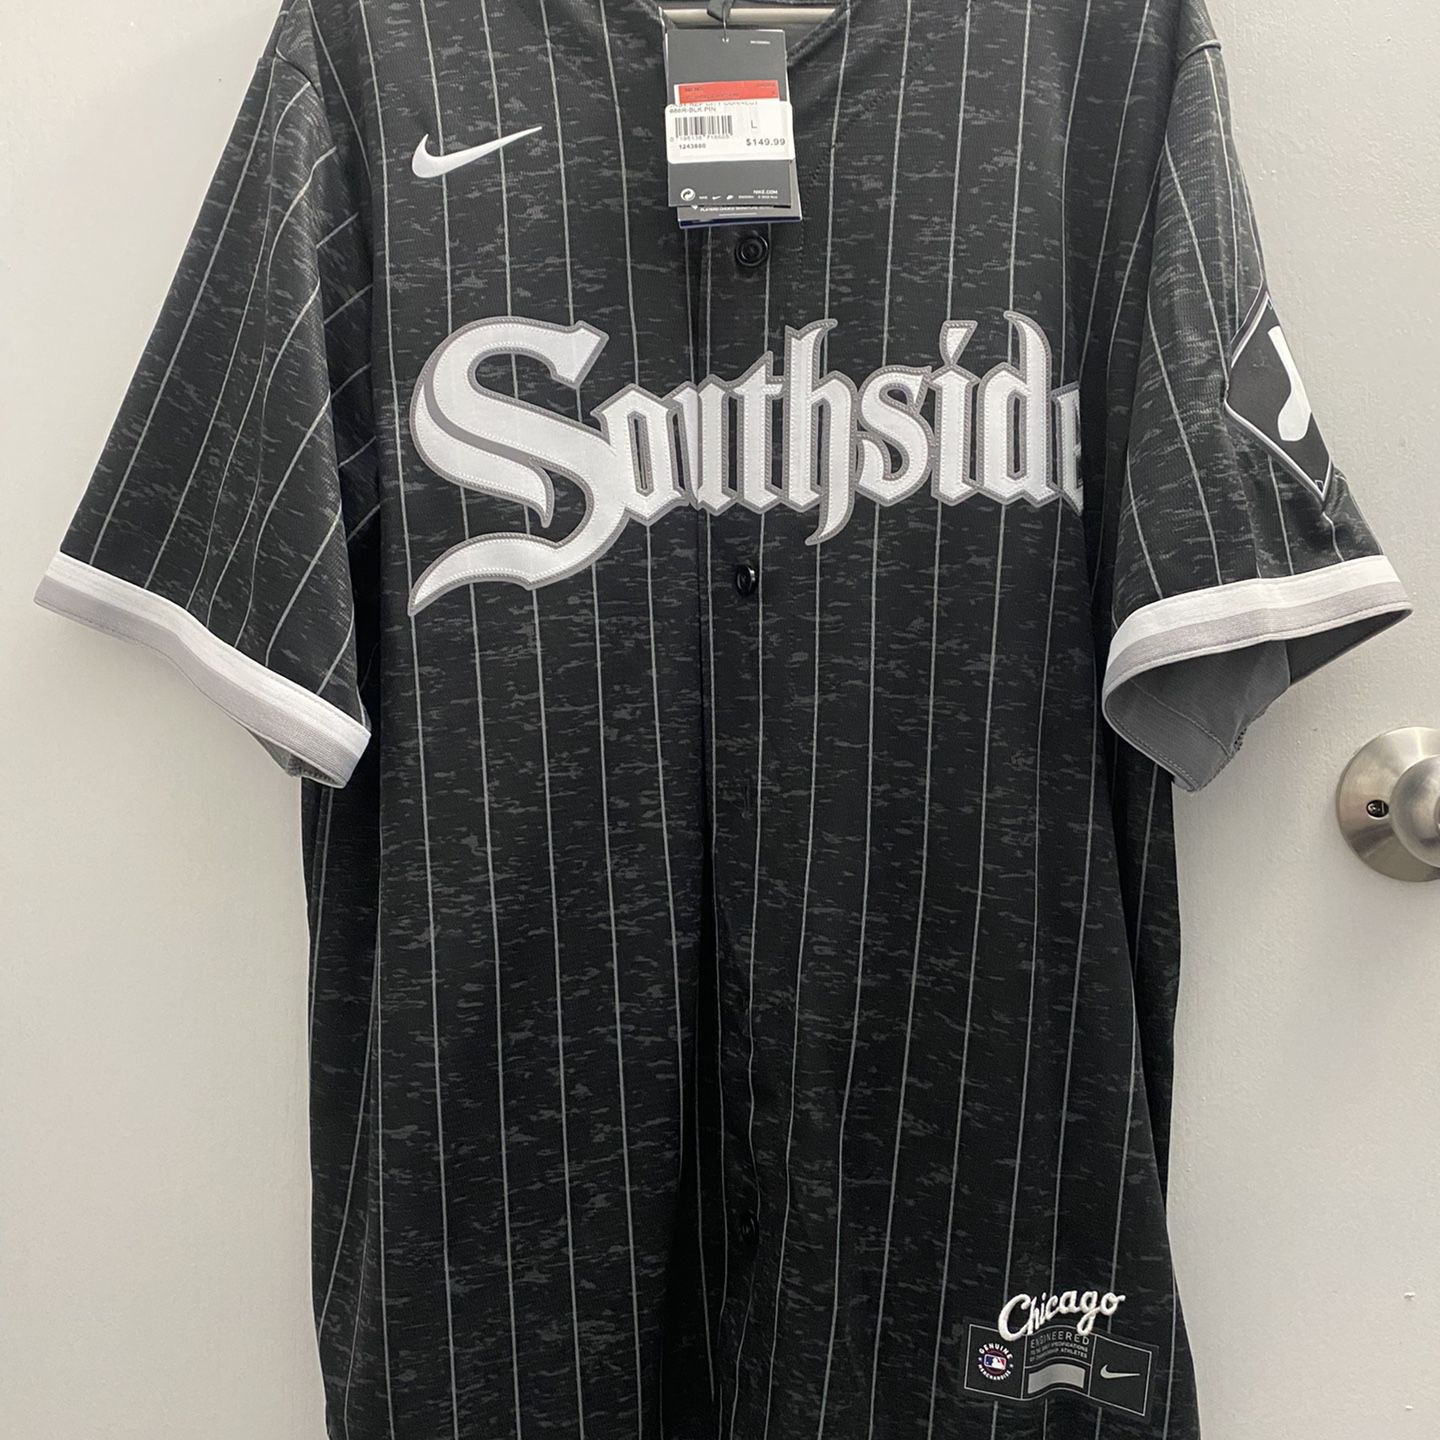 Chicago White Sox Southside Jersey for Sale in Orland Park, IL